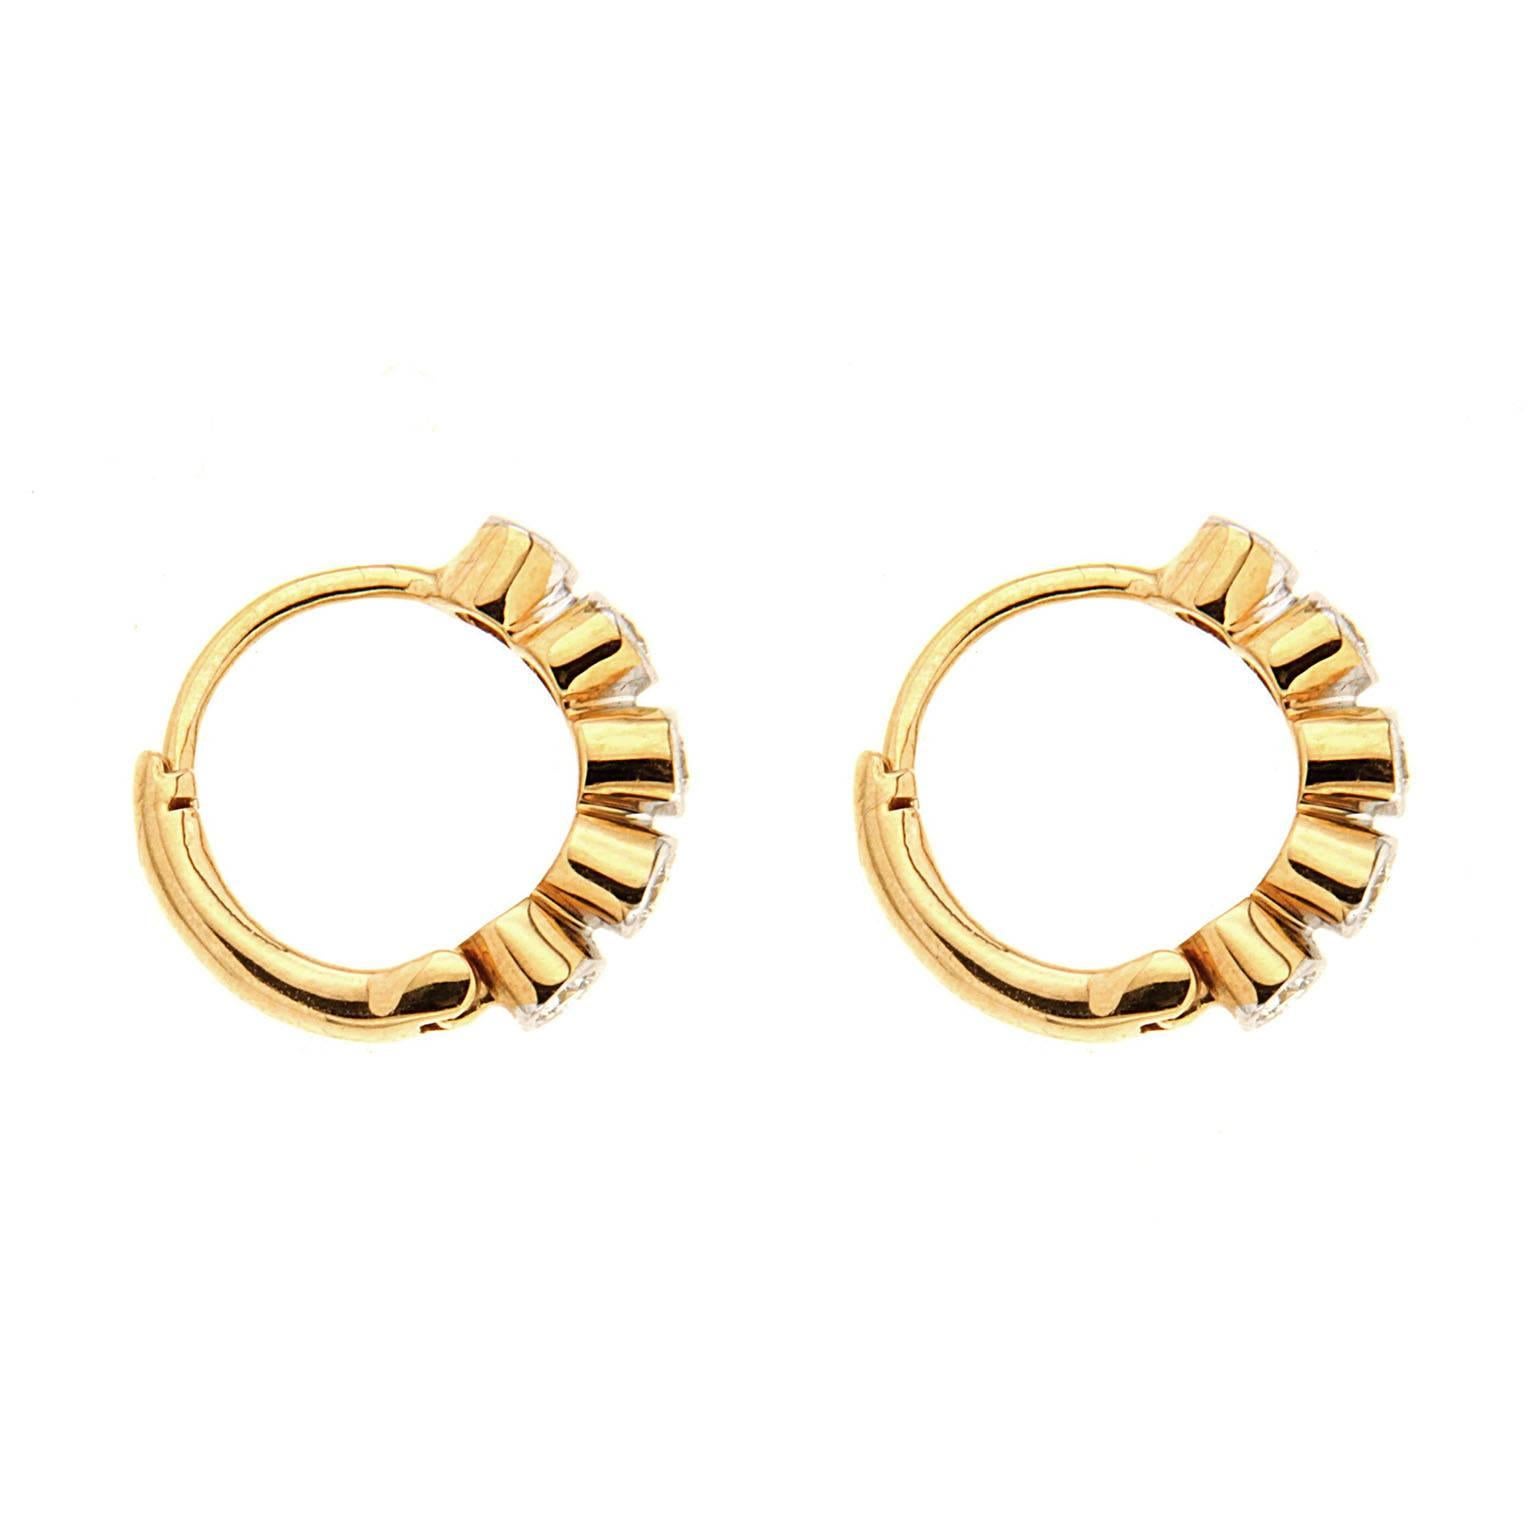 These delicate hoop earrings are made in 18kt yellow gold they feature 0.24 carat total weight of bezel set round brilliant diamonds.